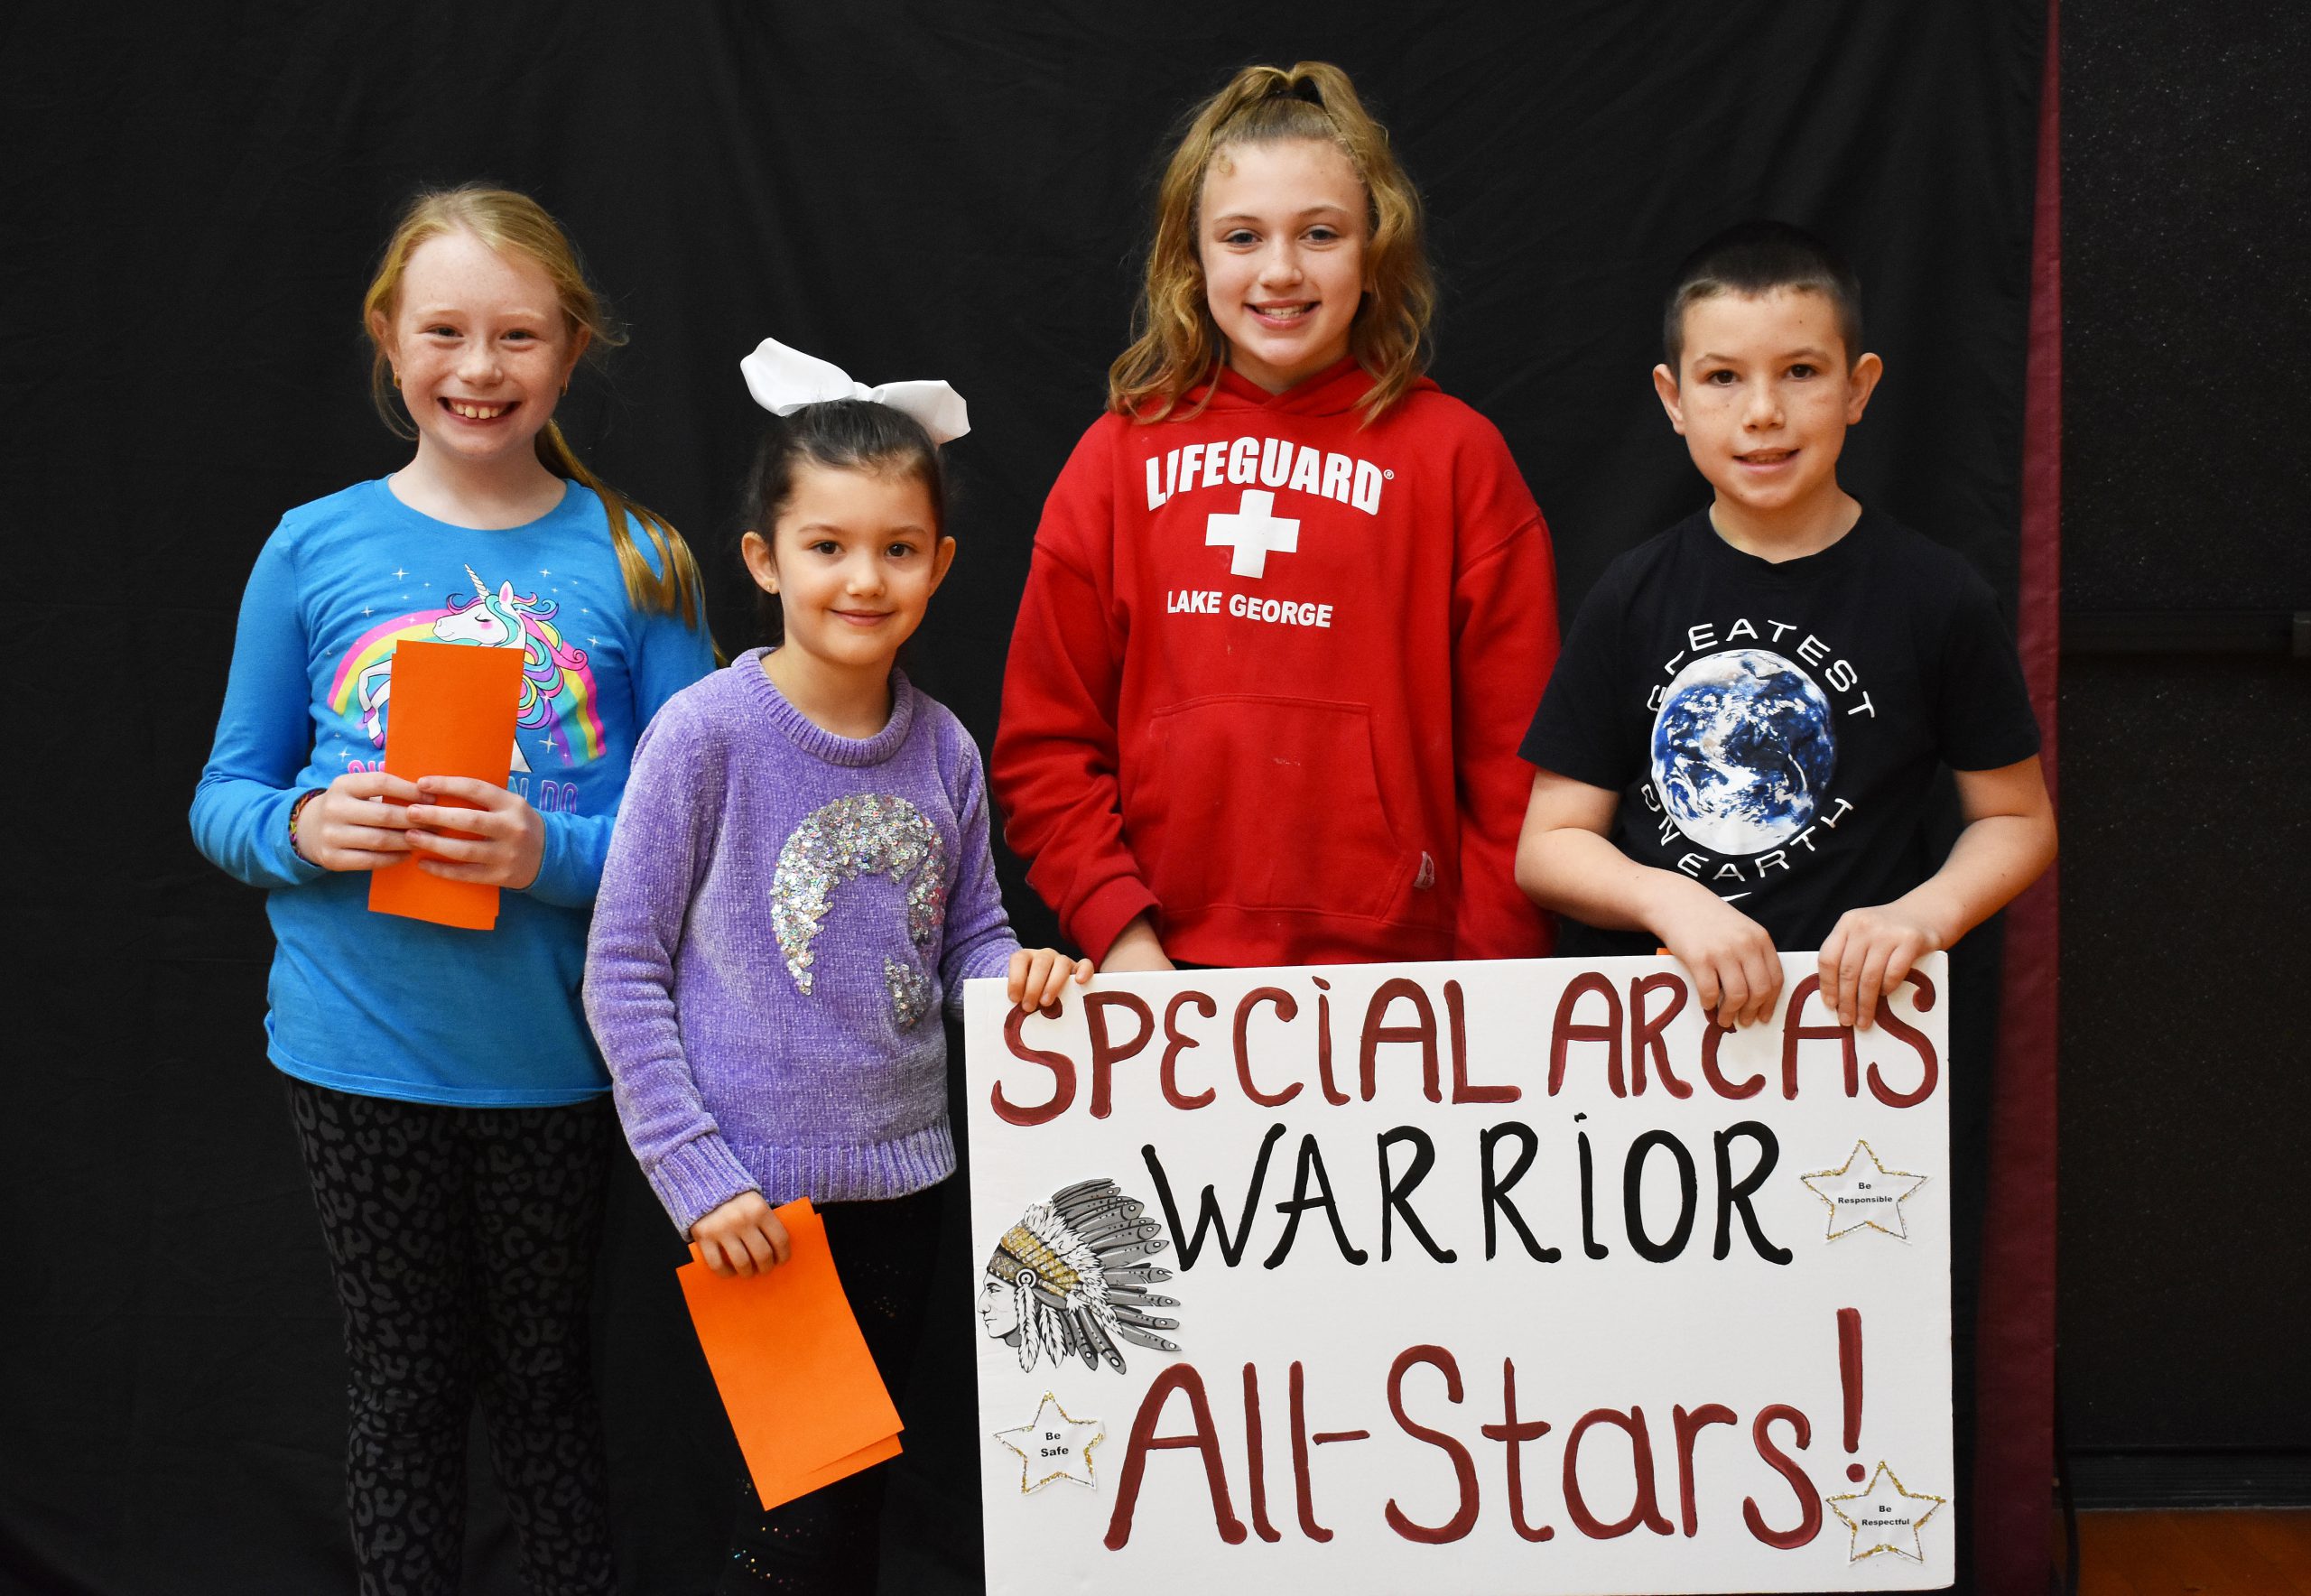 Students lined up with the specials warrior sign